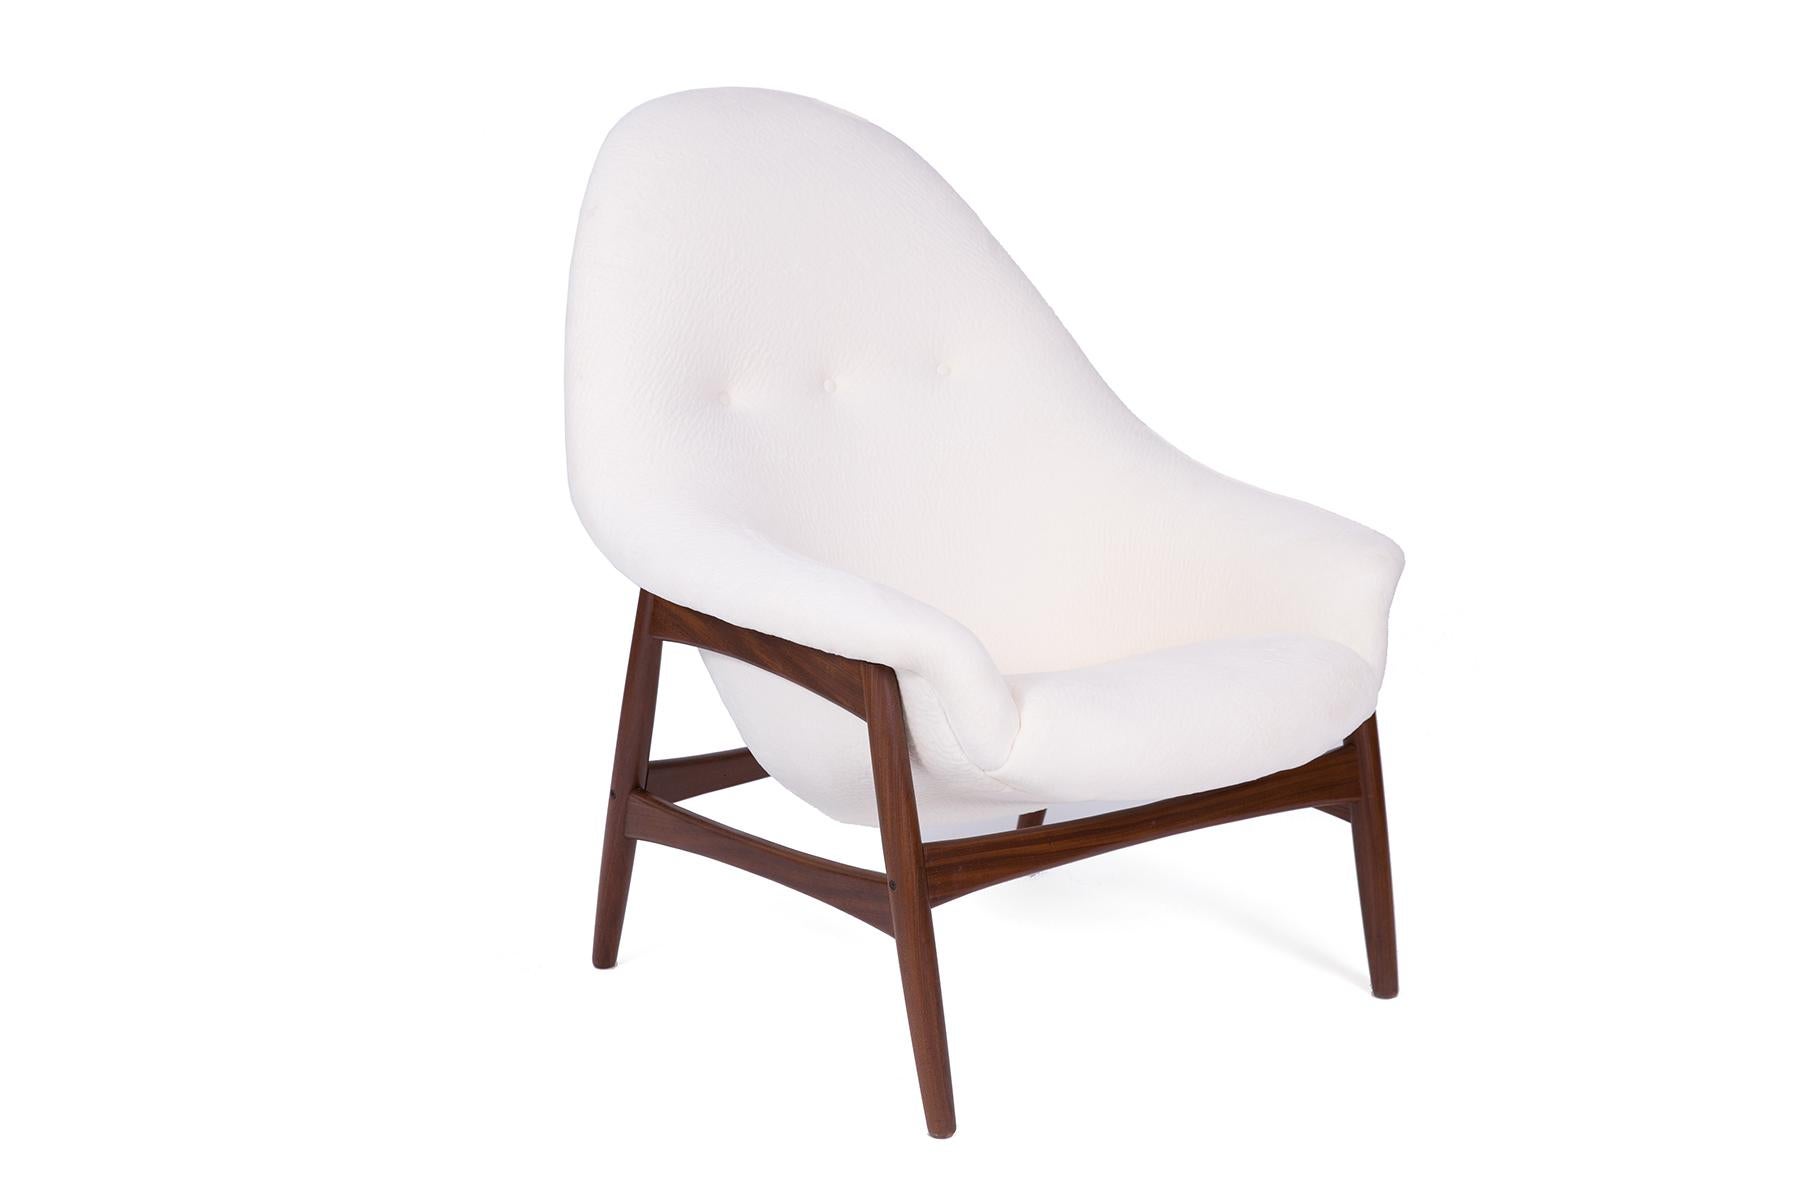 Hans Olsen for Bramin sculptural pair of lounge chairs circa early 1960s. This pair features tapered walnut frames and new plush off-white upholstery. Price listed is for the pair.